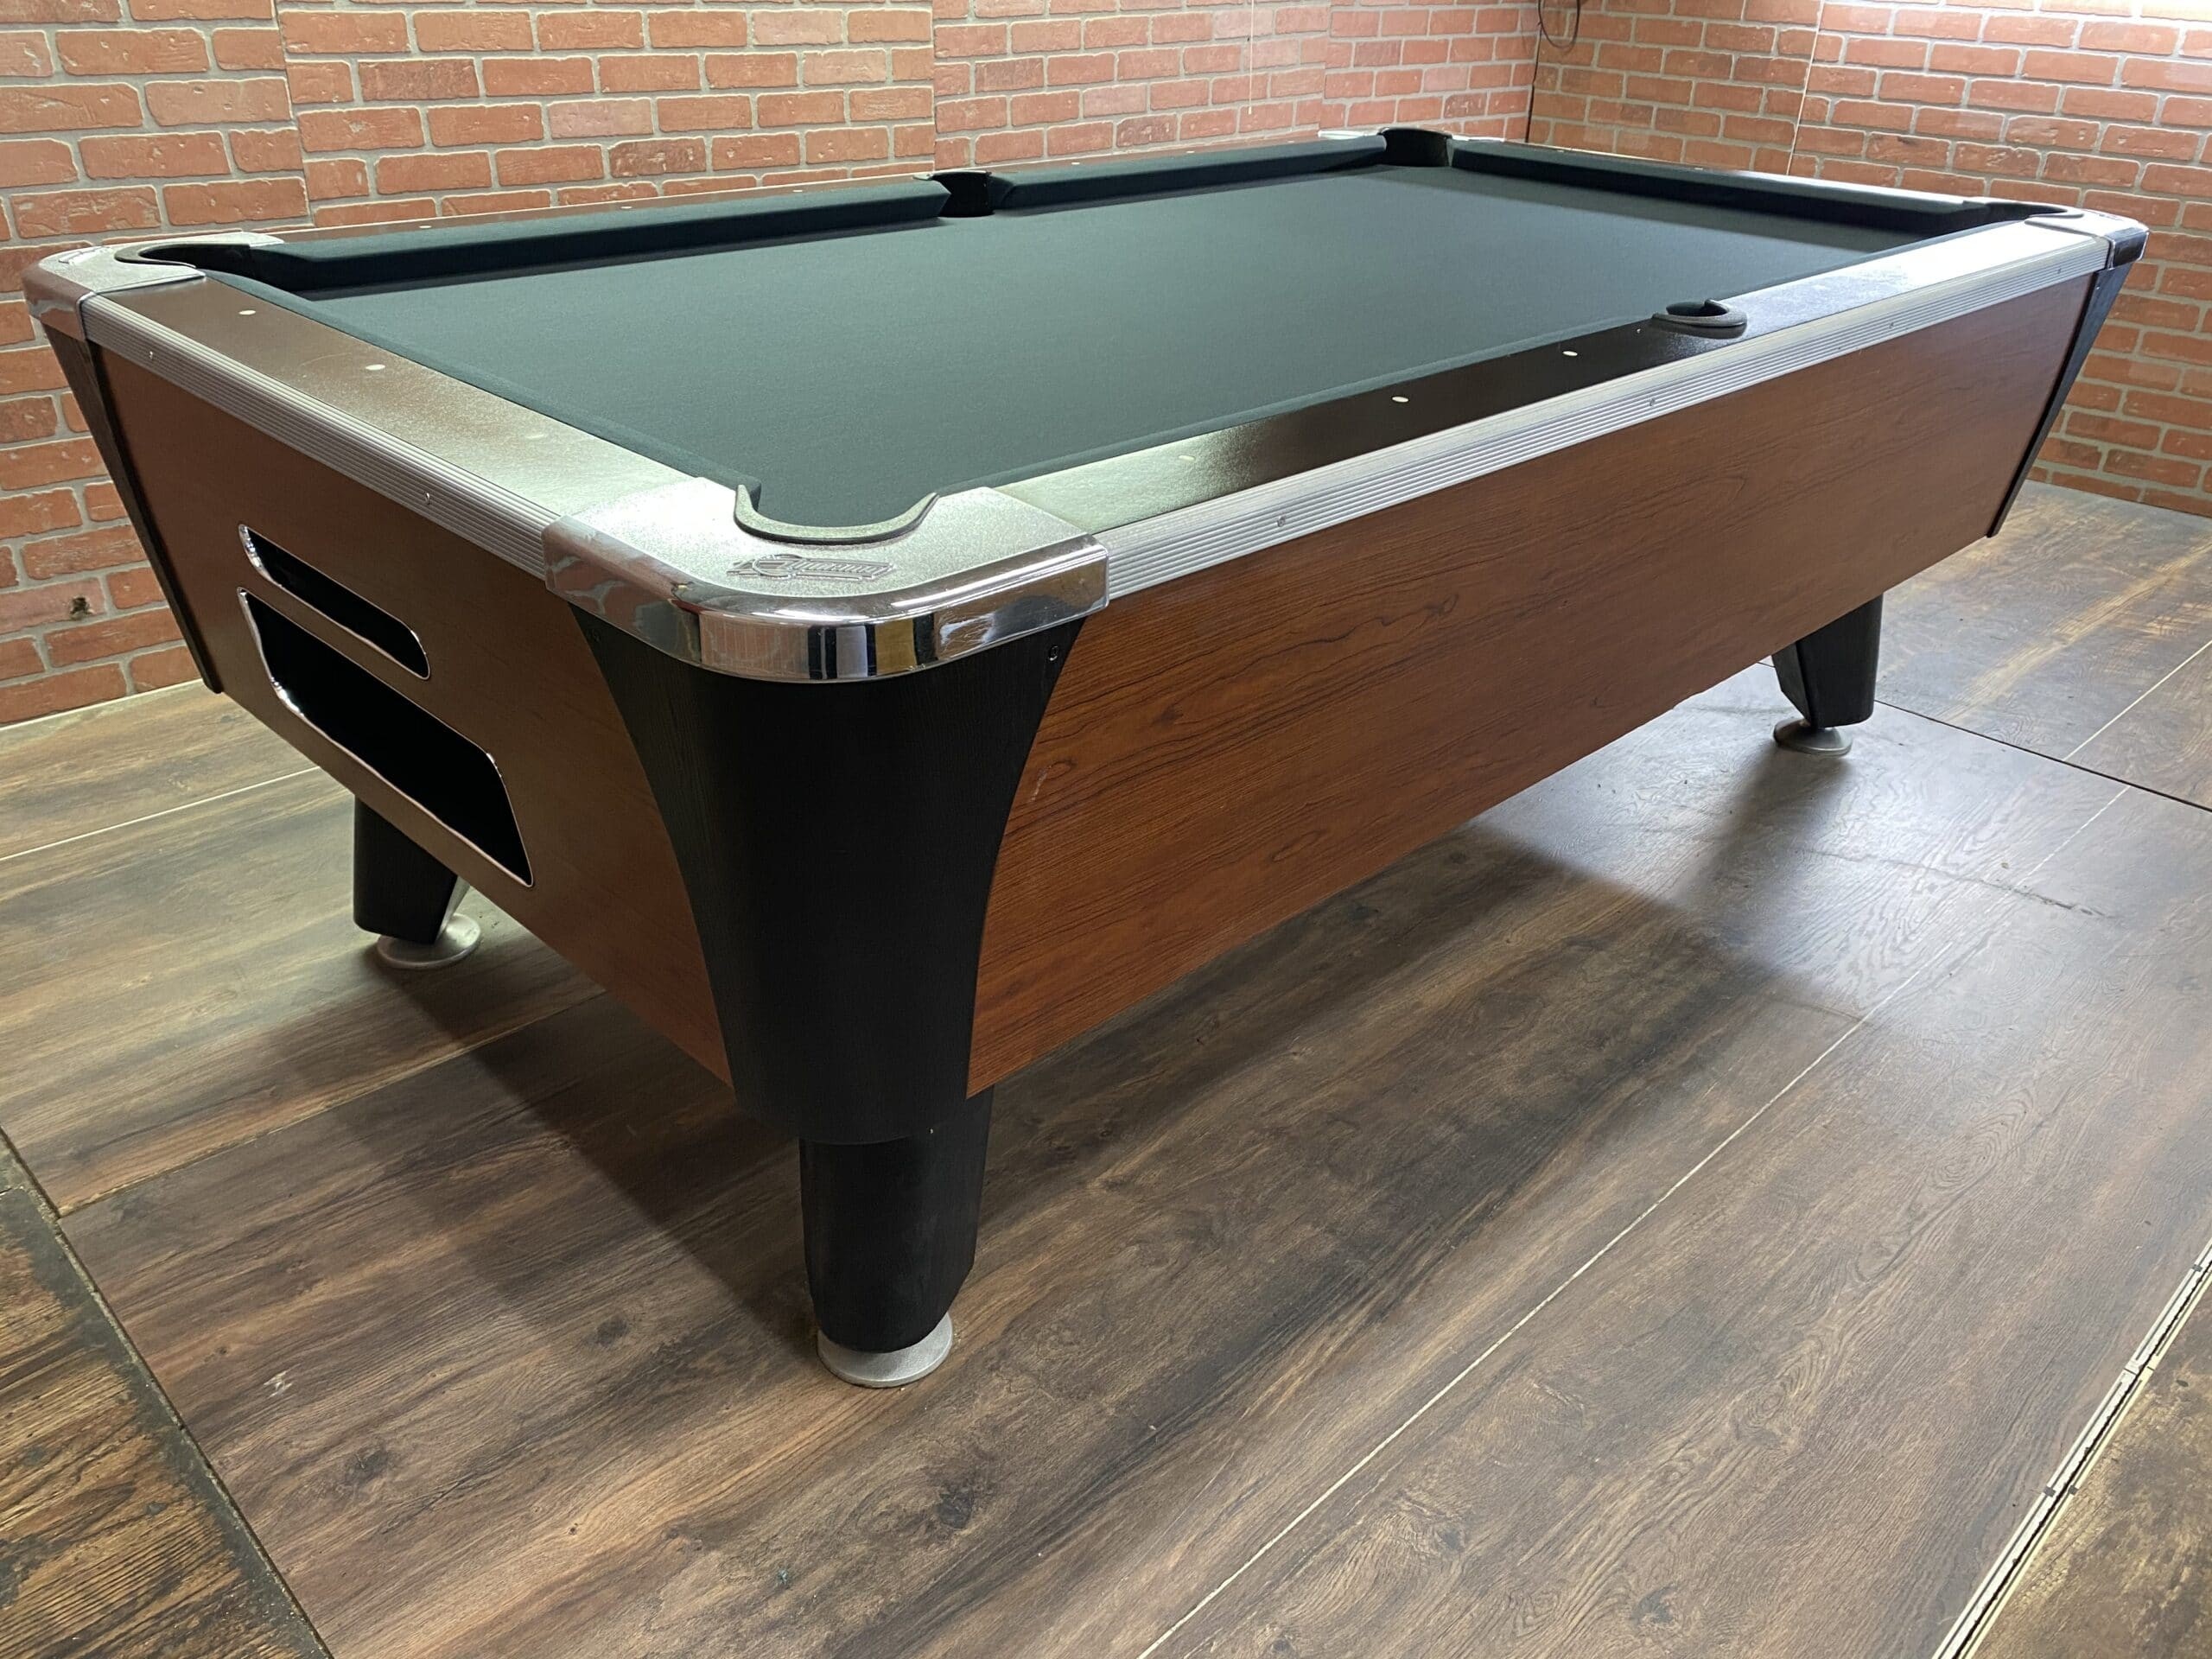 7 dynamo red oak used coin operated pool table used